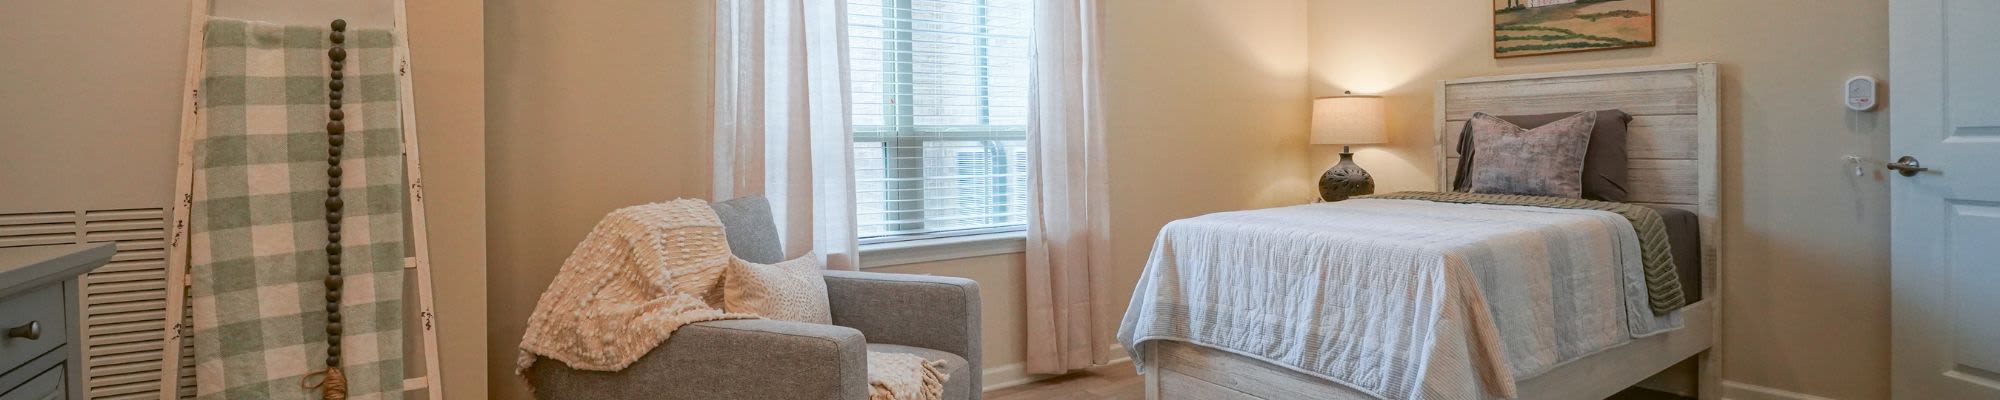 Memory Care at Harmony at Five Forks in Simpsonville, South Carolina